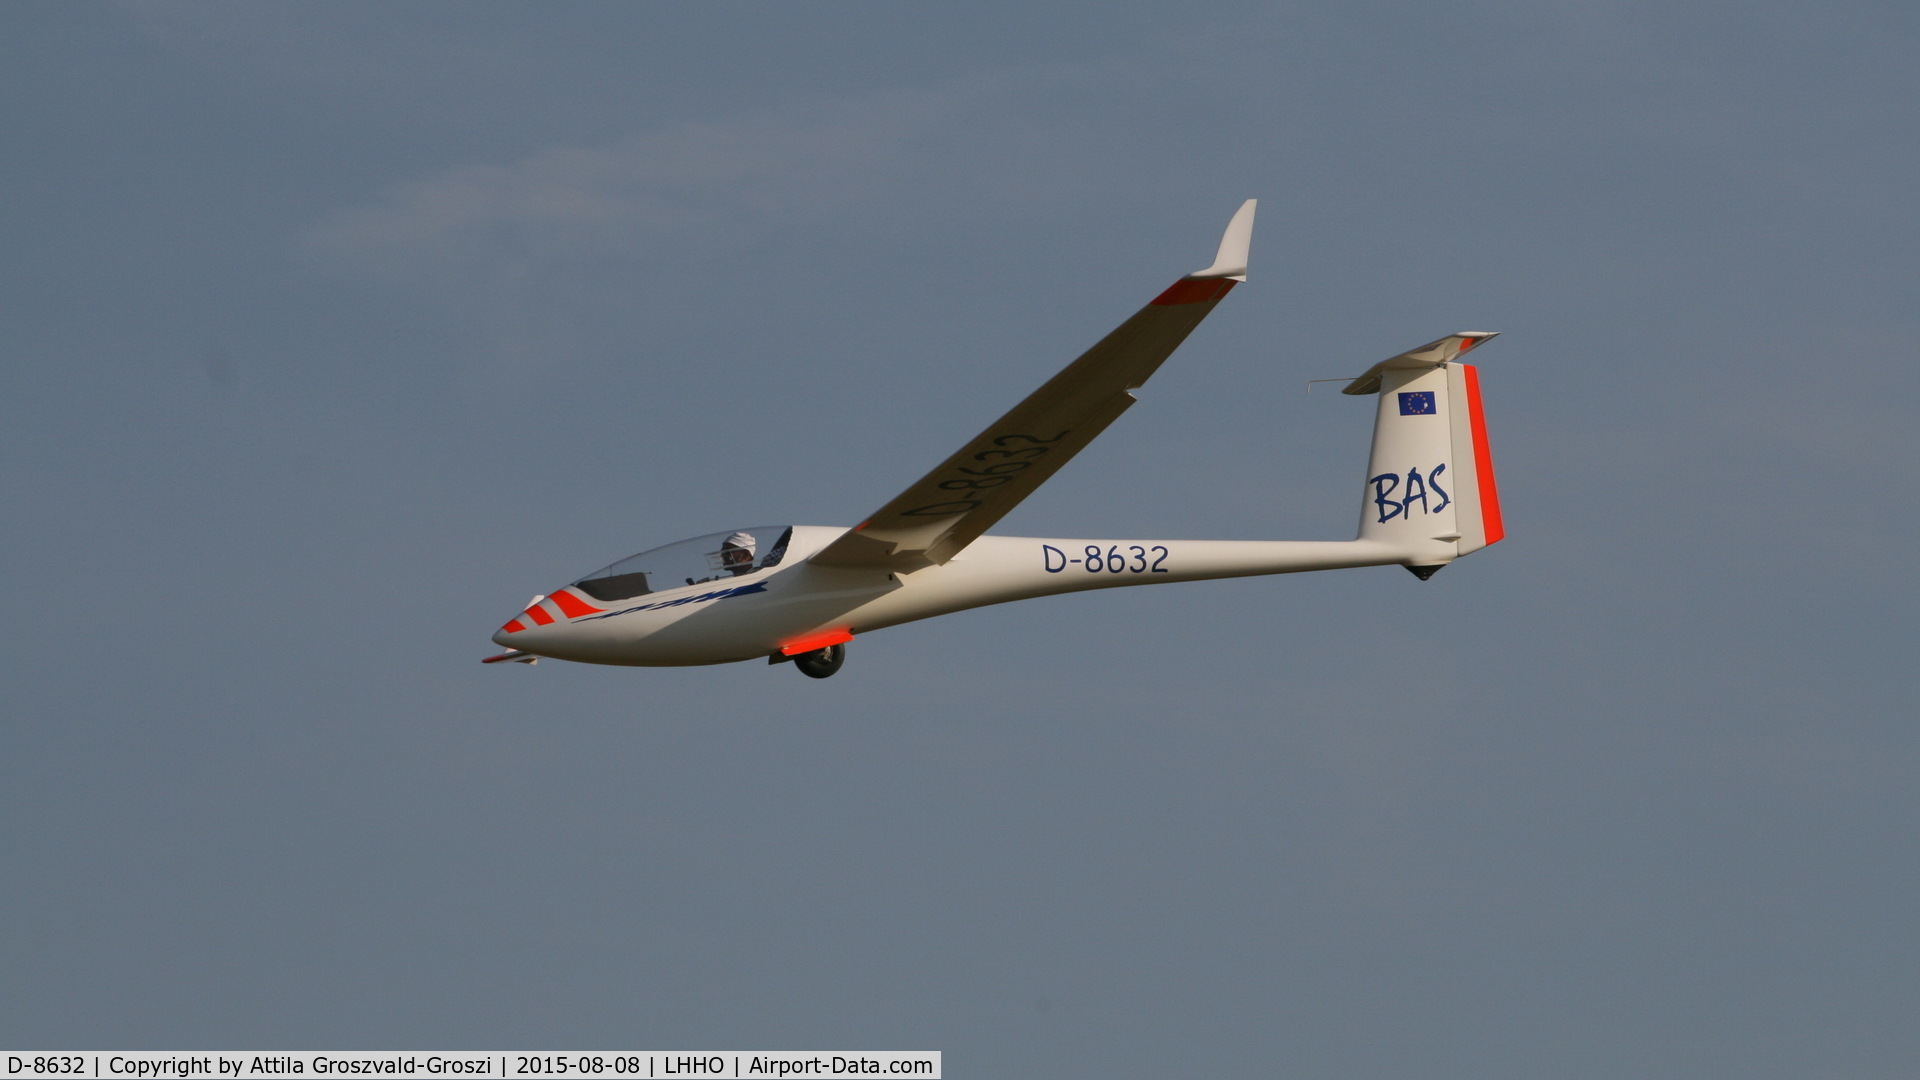 D-8632, 1986 Schleicher ASW-20 C/N 20591, Hajdúszoboszló Airport, Hungary - 60. Hungary Gliding National Championship and third Civis Thermal Cup, 2015